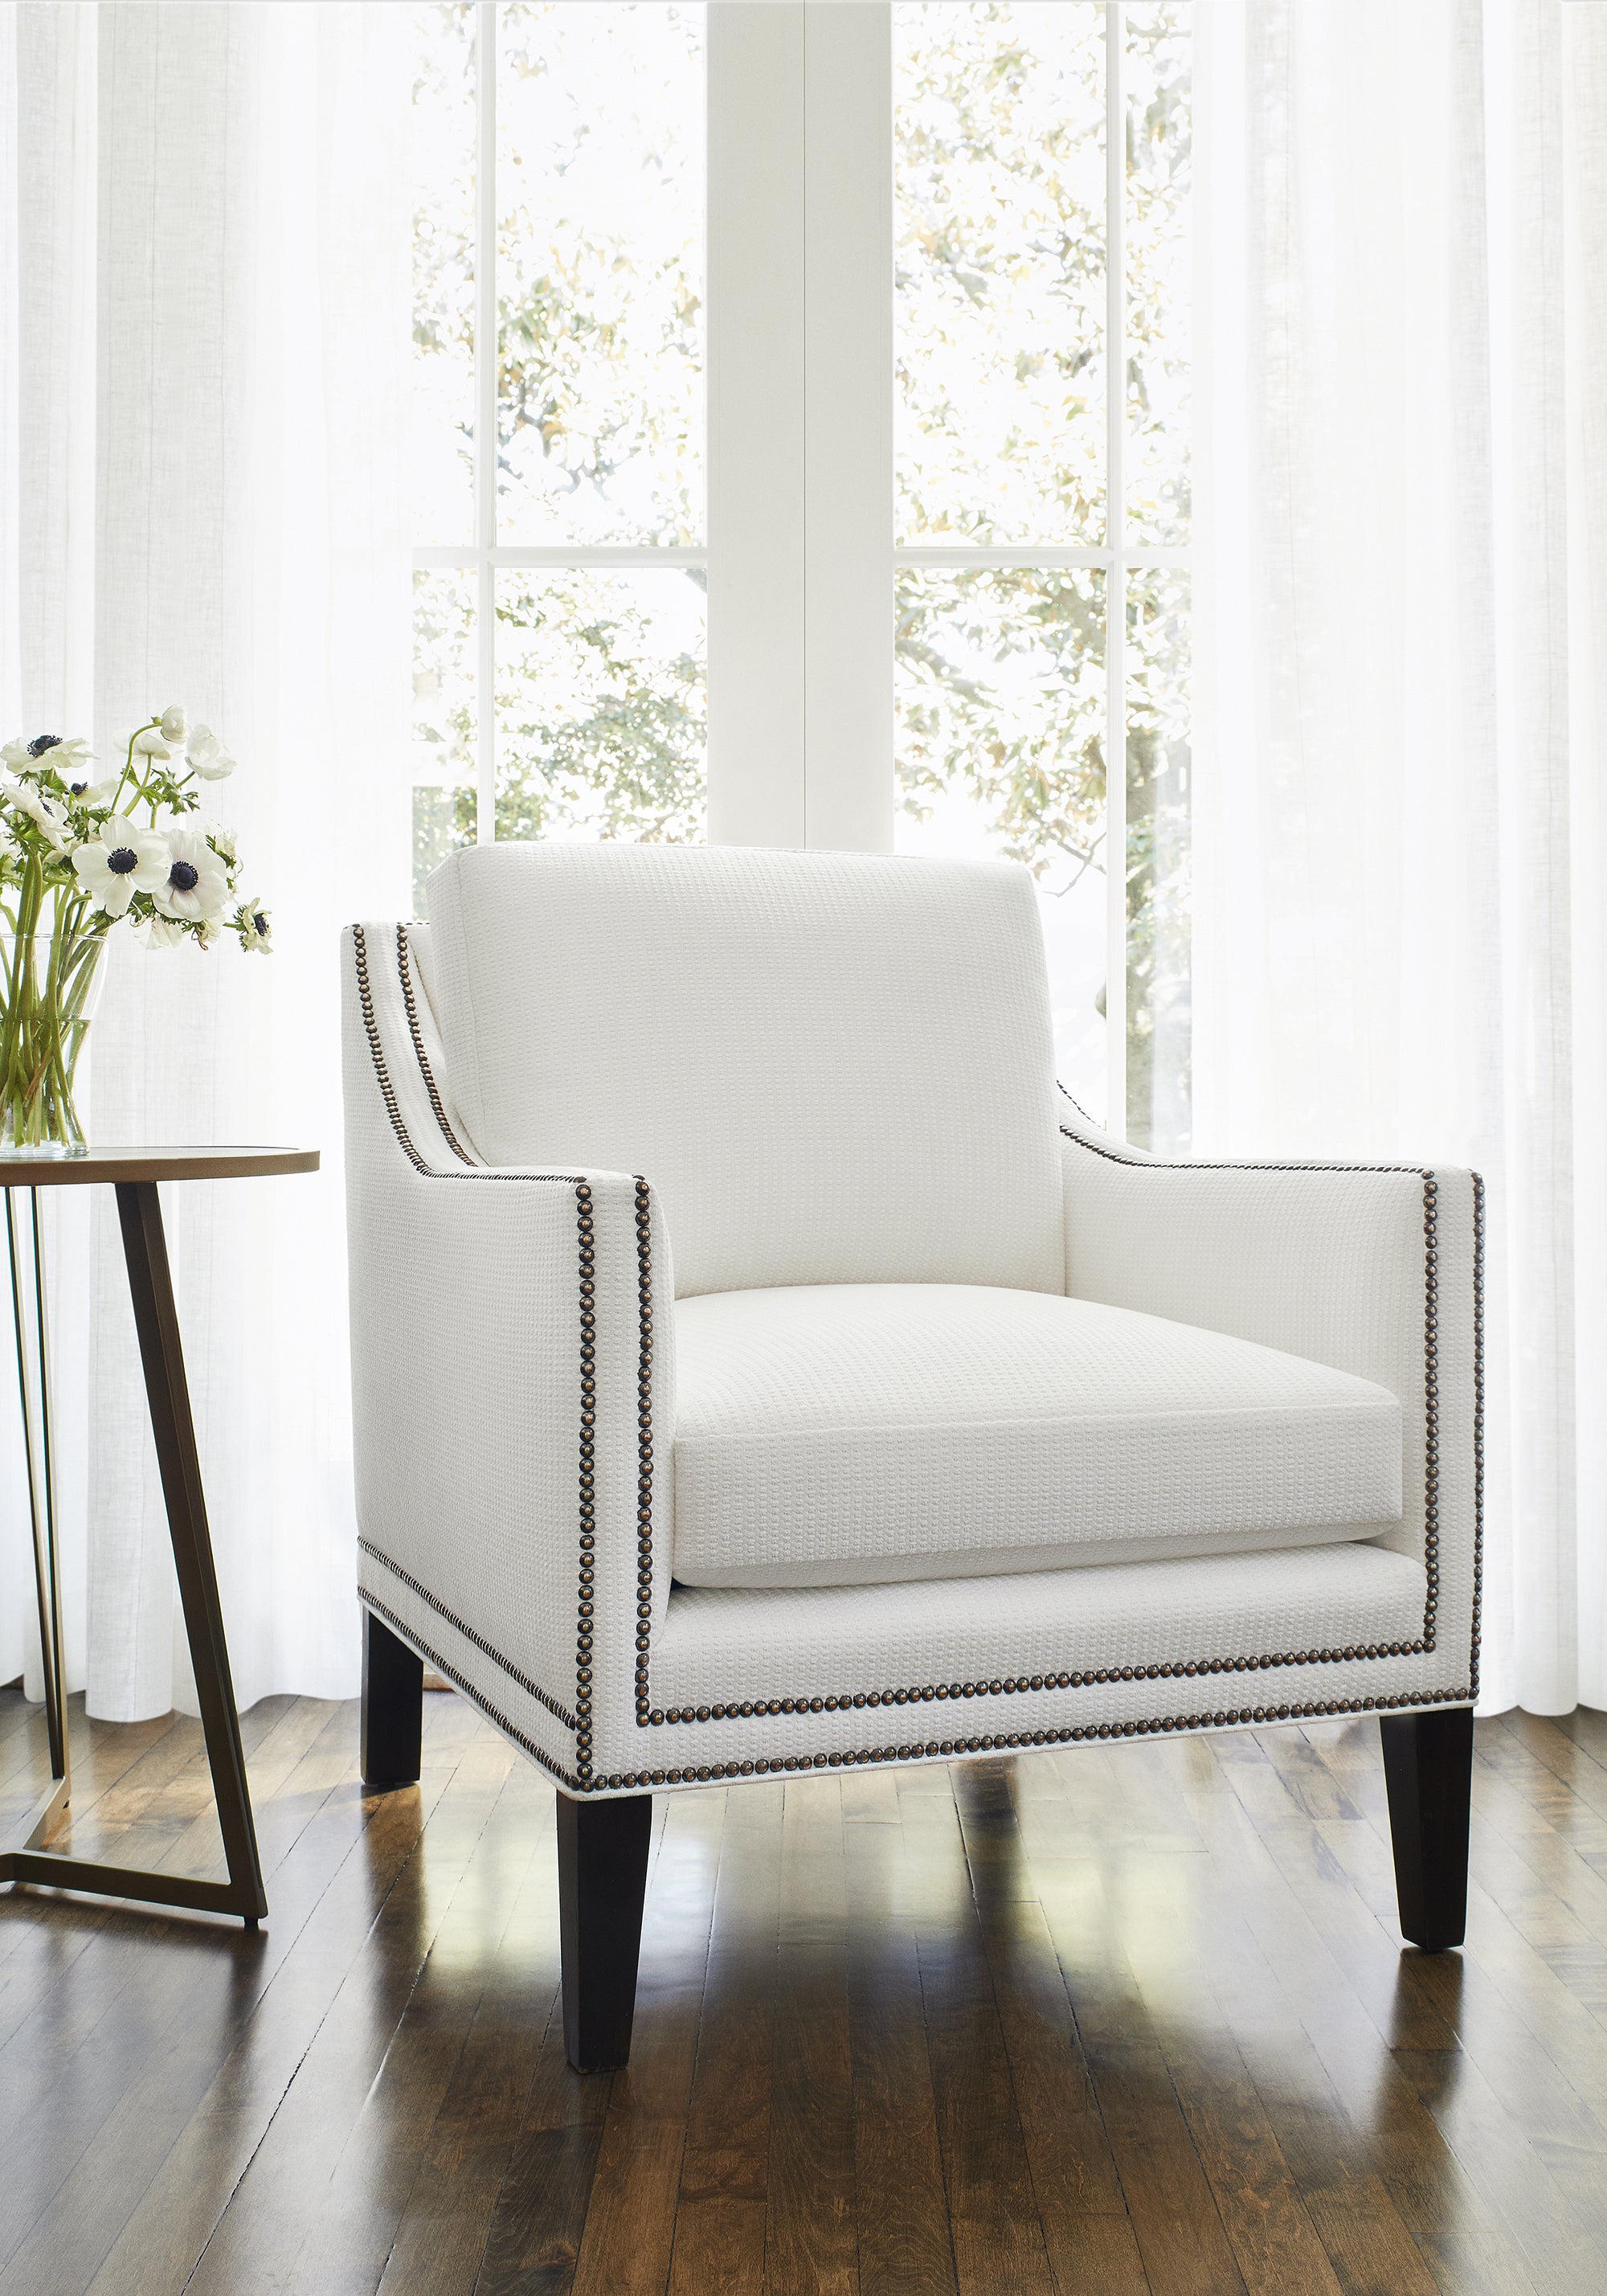 Westwood Chair in Stratus woven fabric in Ivory color - pattern number W75225 - by Thibaut in the Elements collection